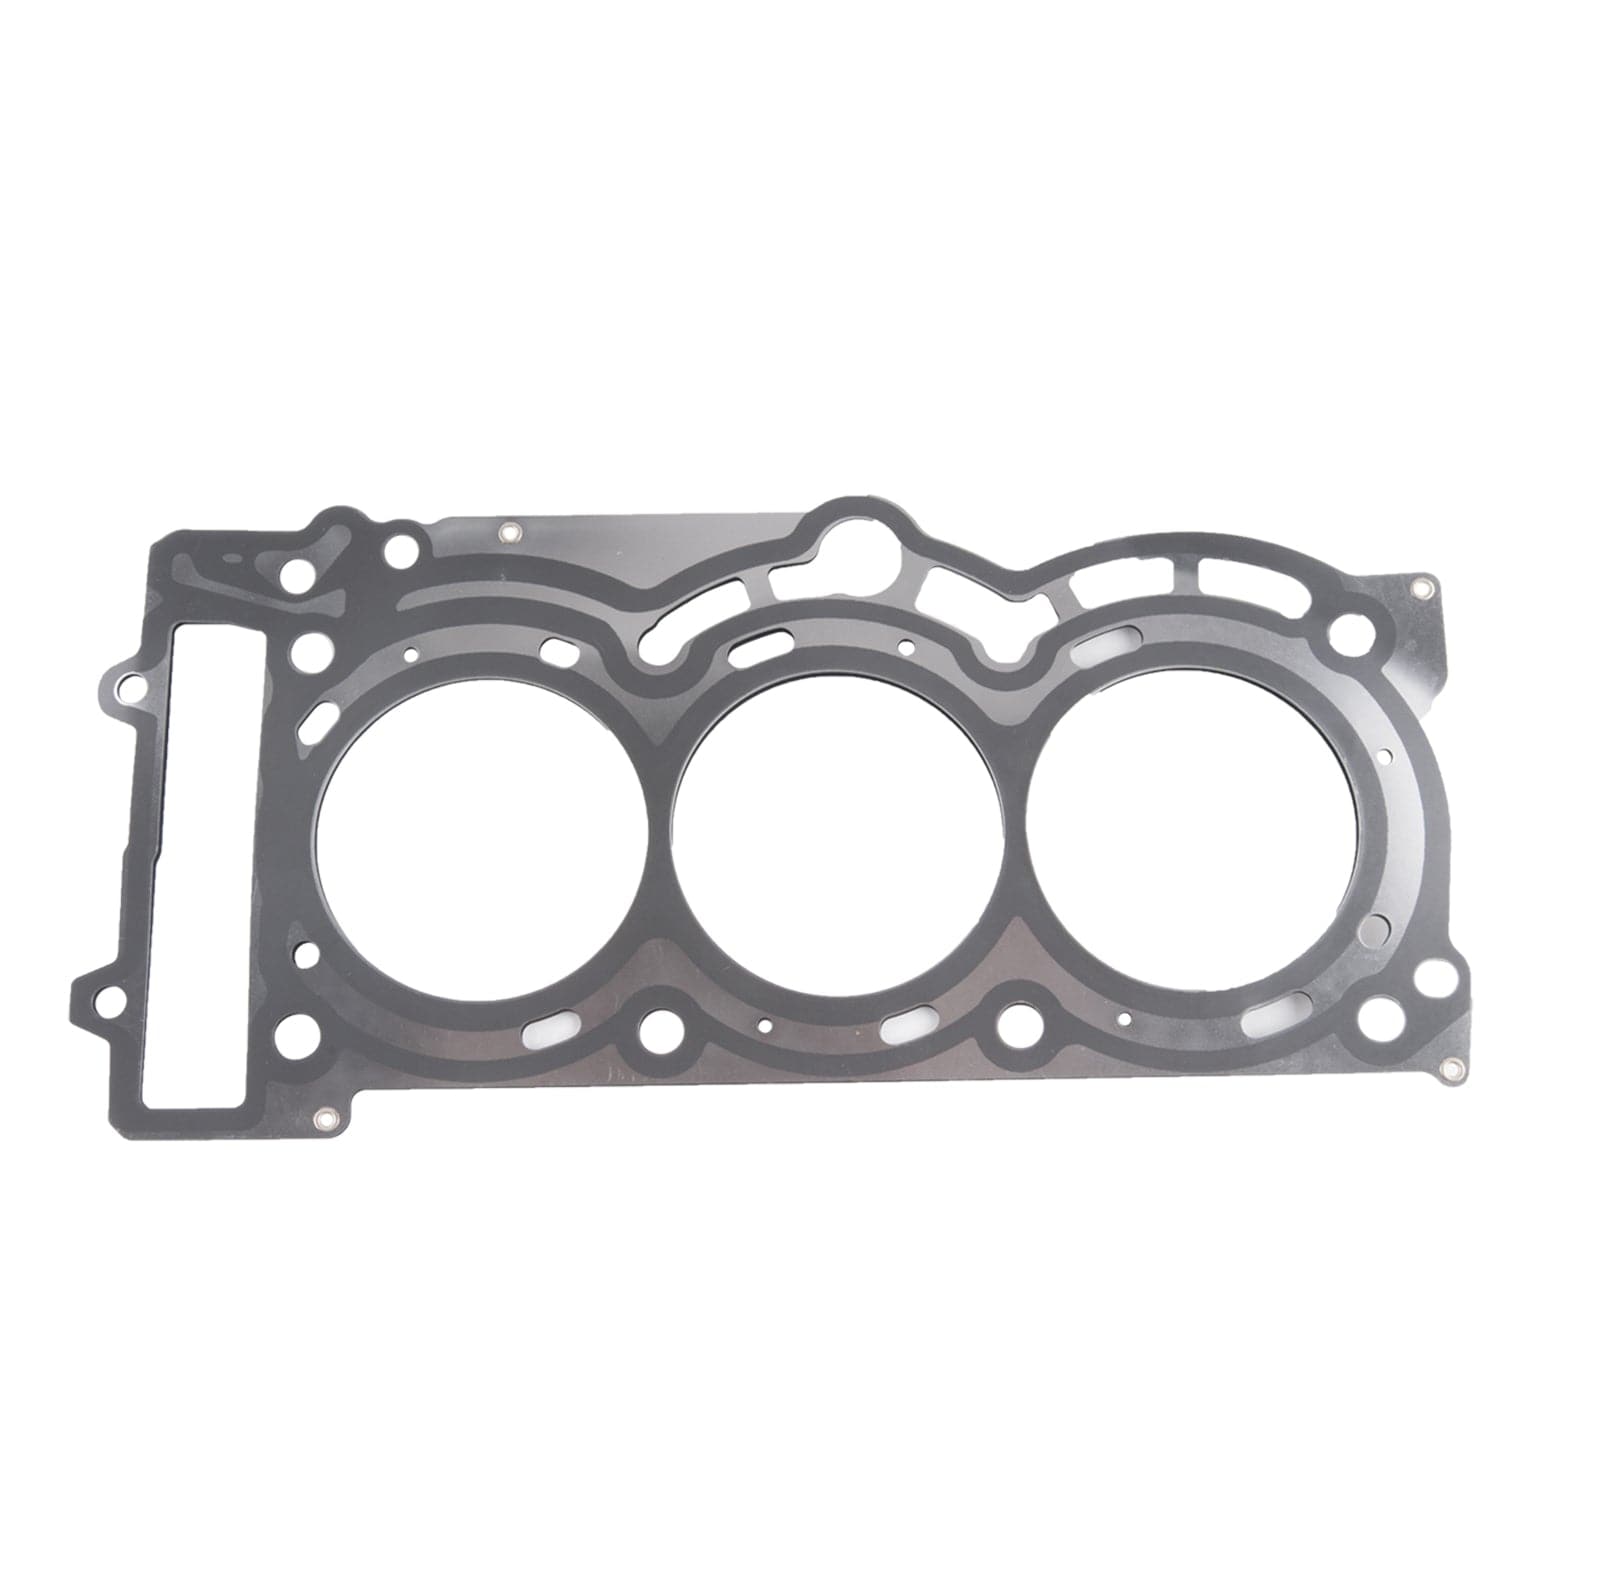 New Replacement Cylinder Head Gasket for Sea-Doo Spark 2014-2018 420431813